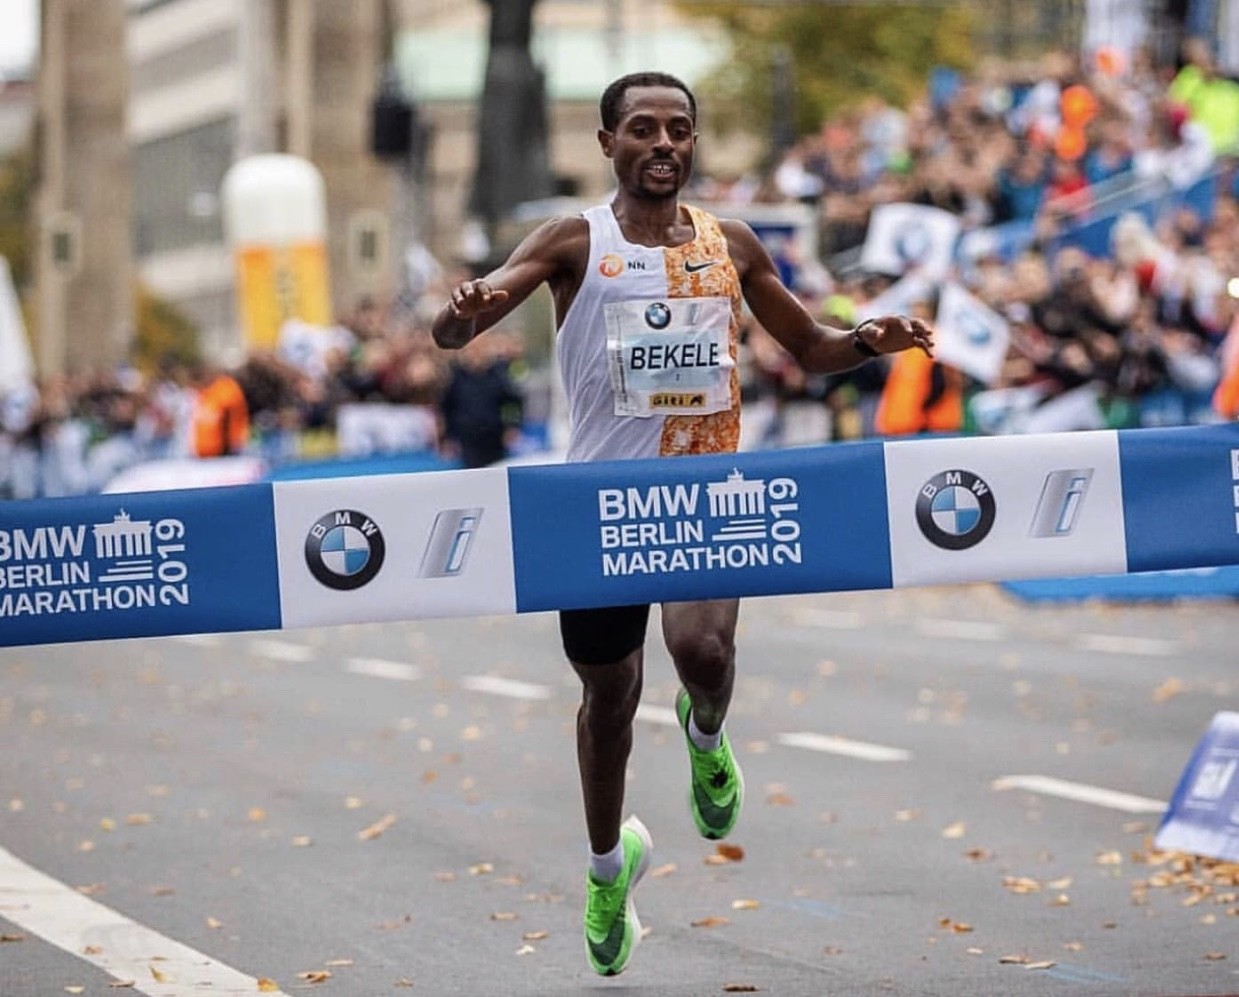 Kenenisa Bekele wins Berlin Marathon just missed breaking the world record by two seconds 